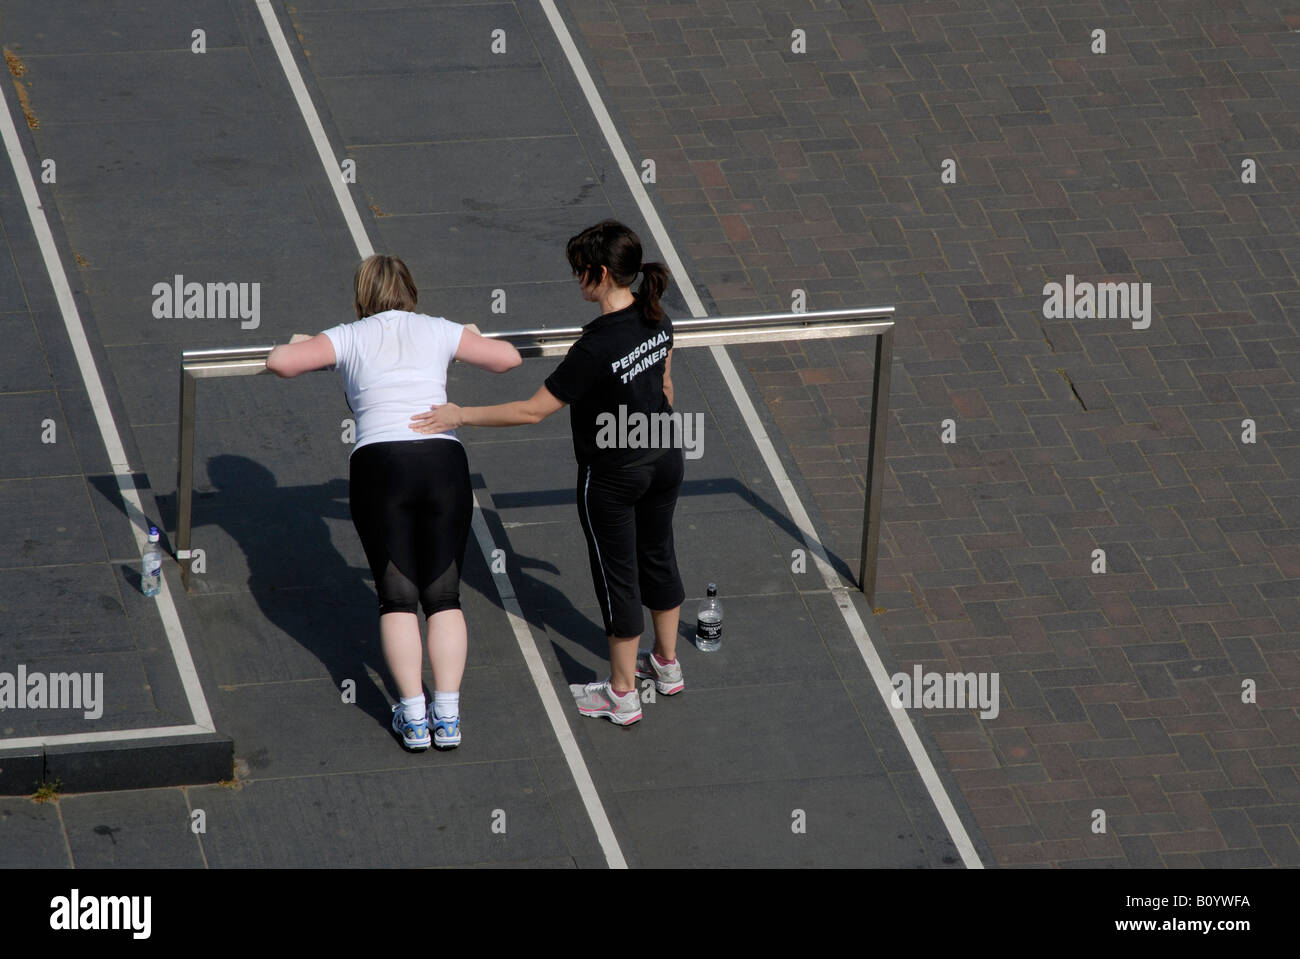 Personal trainer (indicated on the back of her t-shirt) touching back of client doing push ups on raised bar, South Bank, London Stock Photo